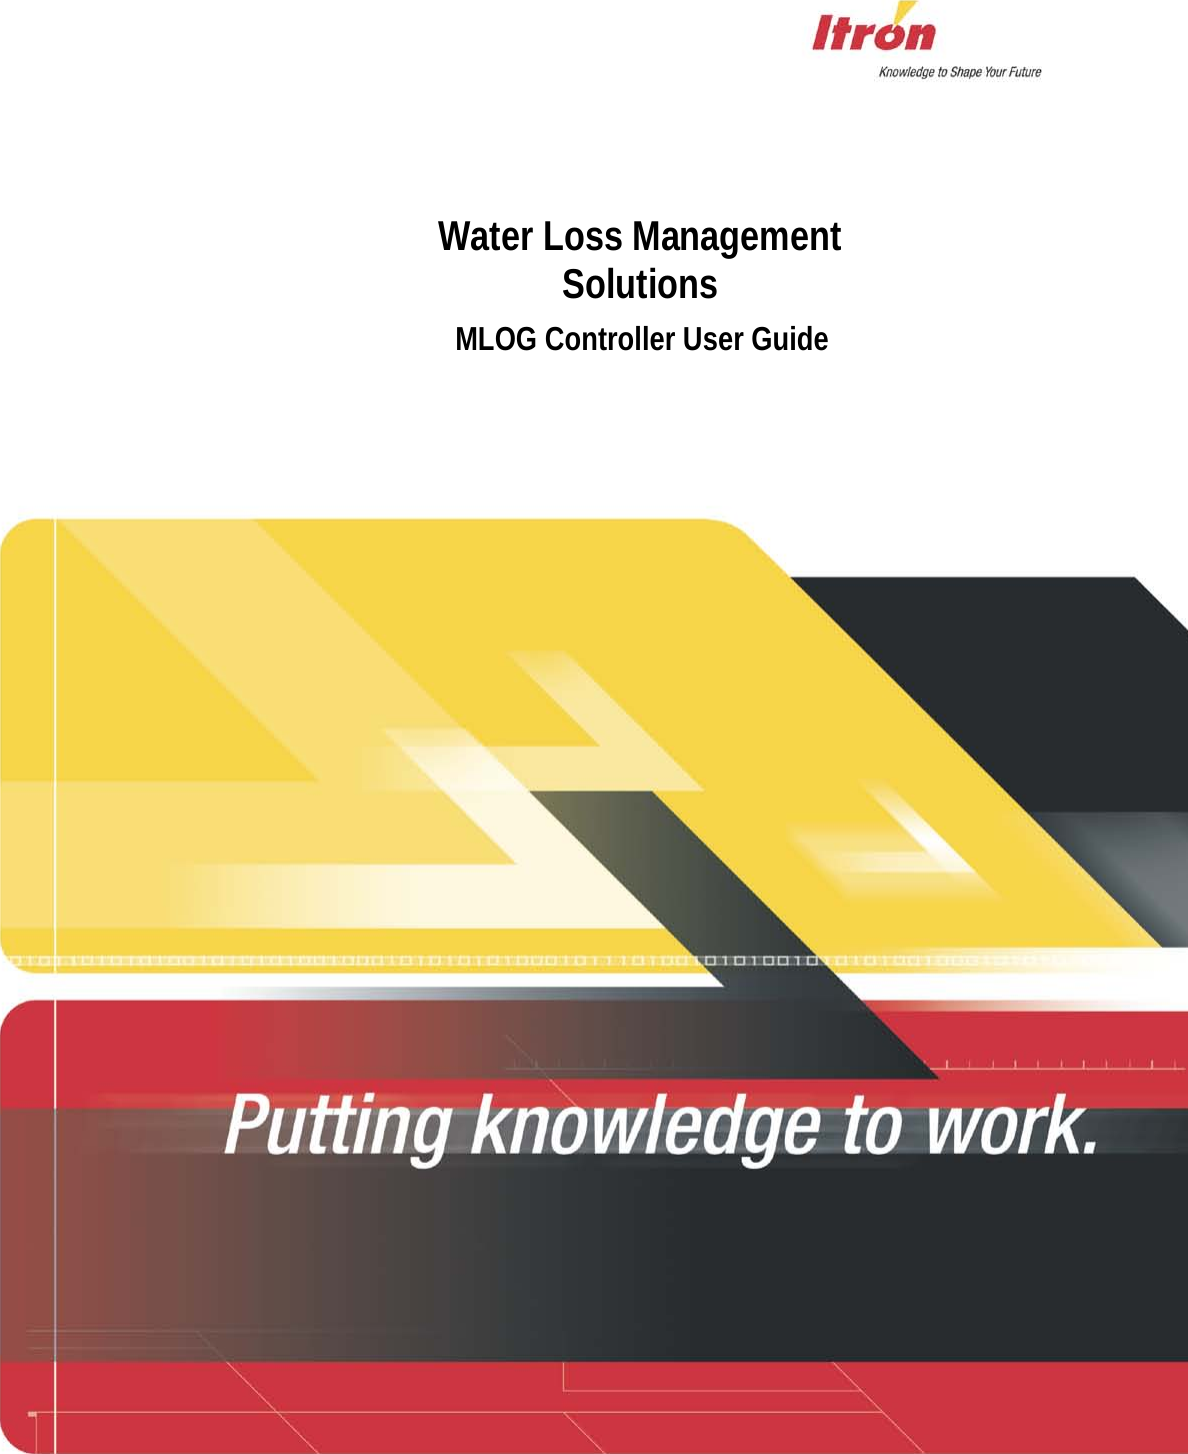    Water Loss Management Solutions MLOG Controller User Guide   TDC-0796-001   